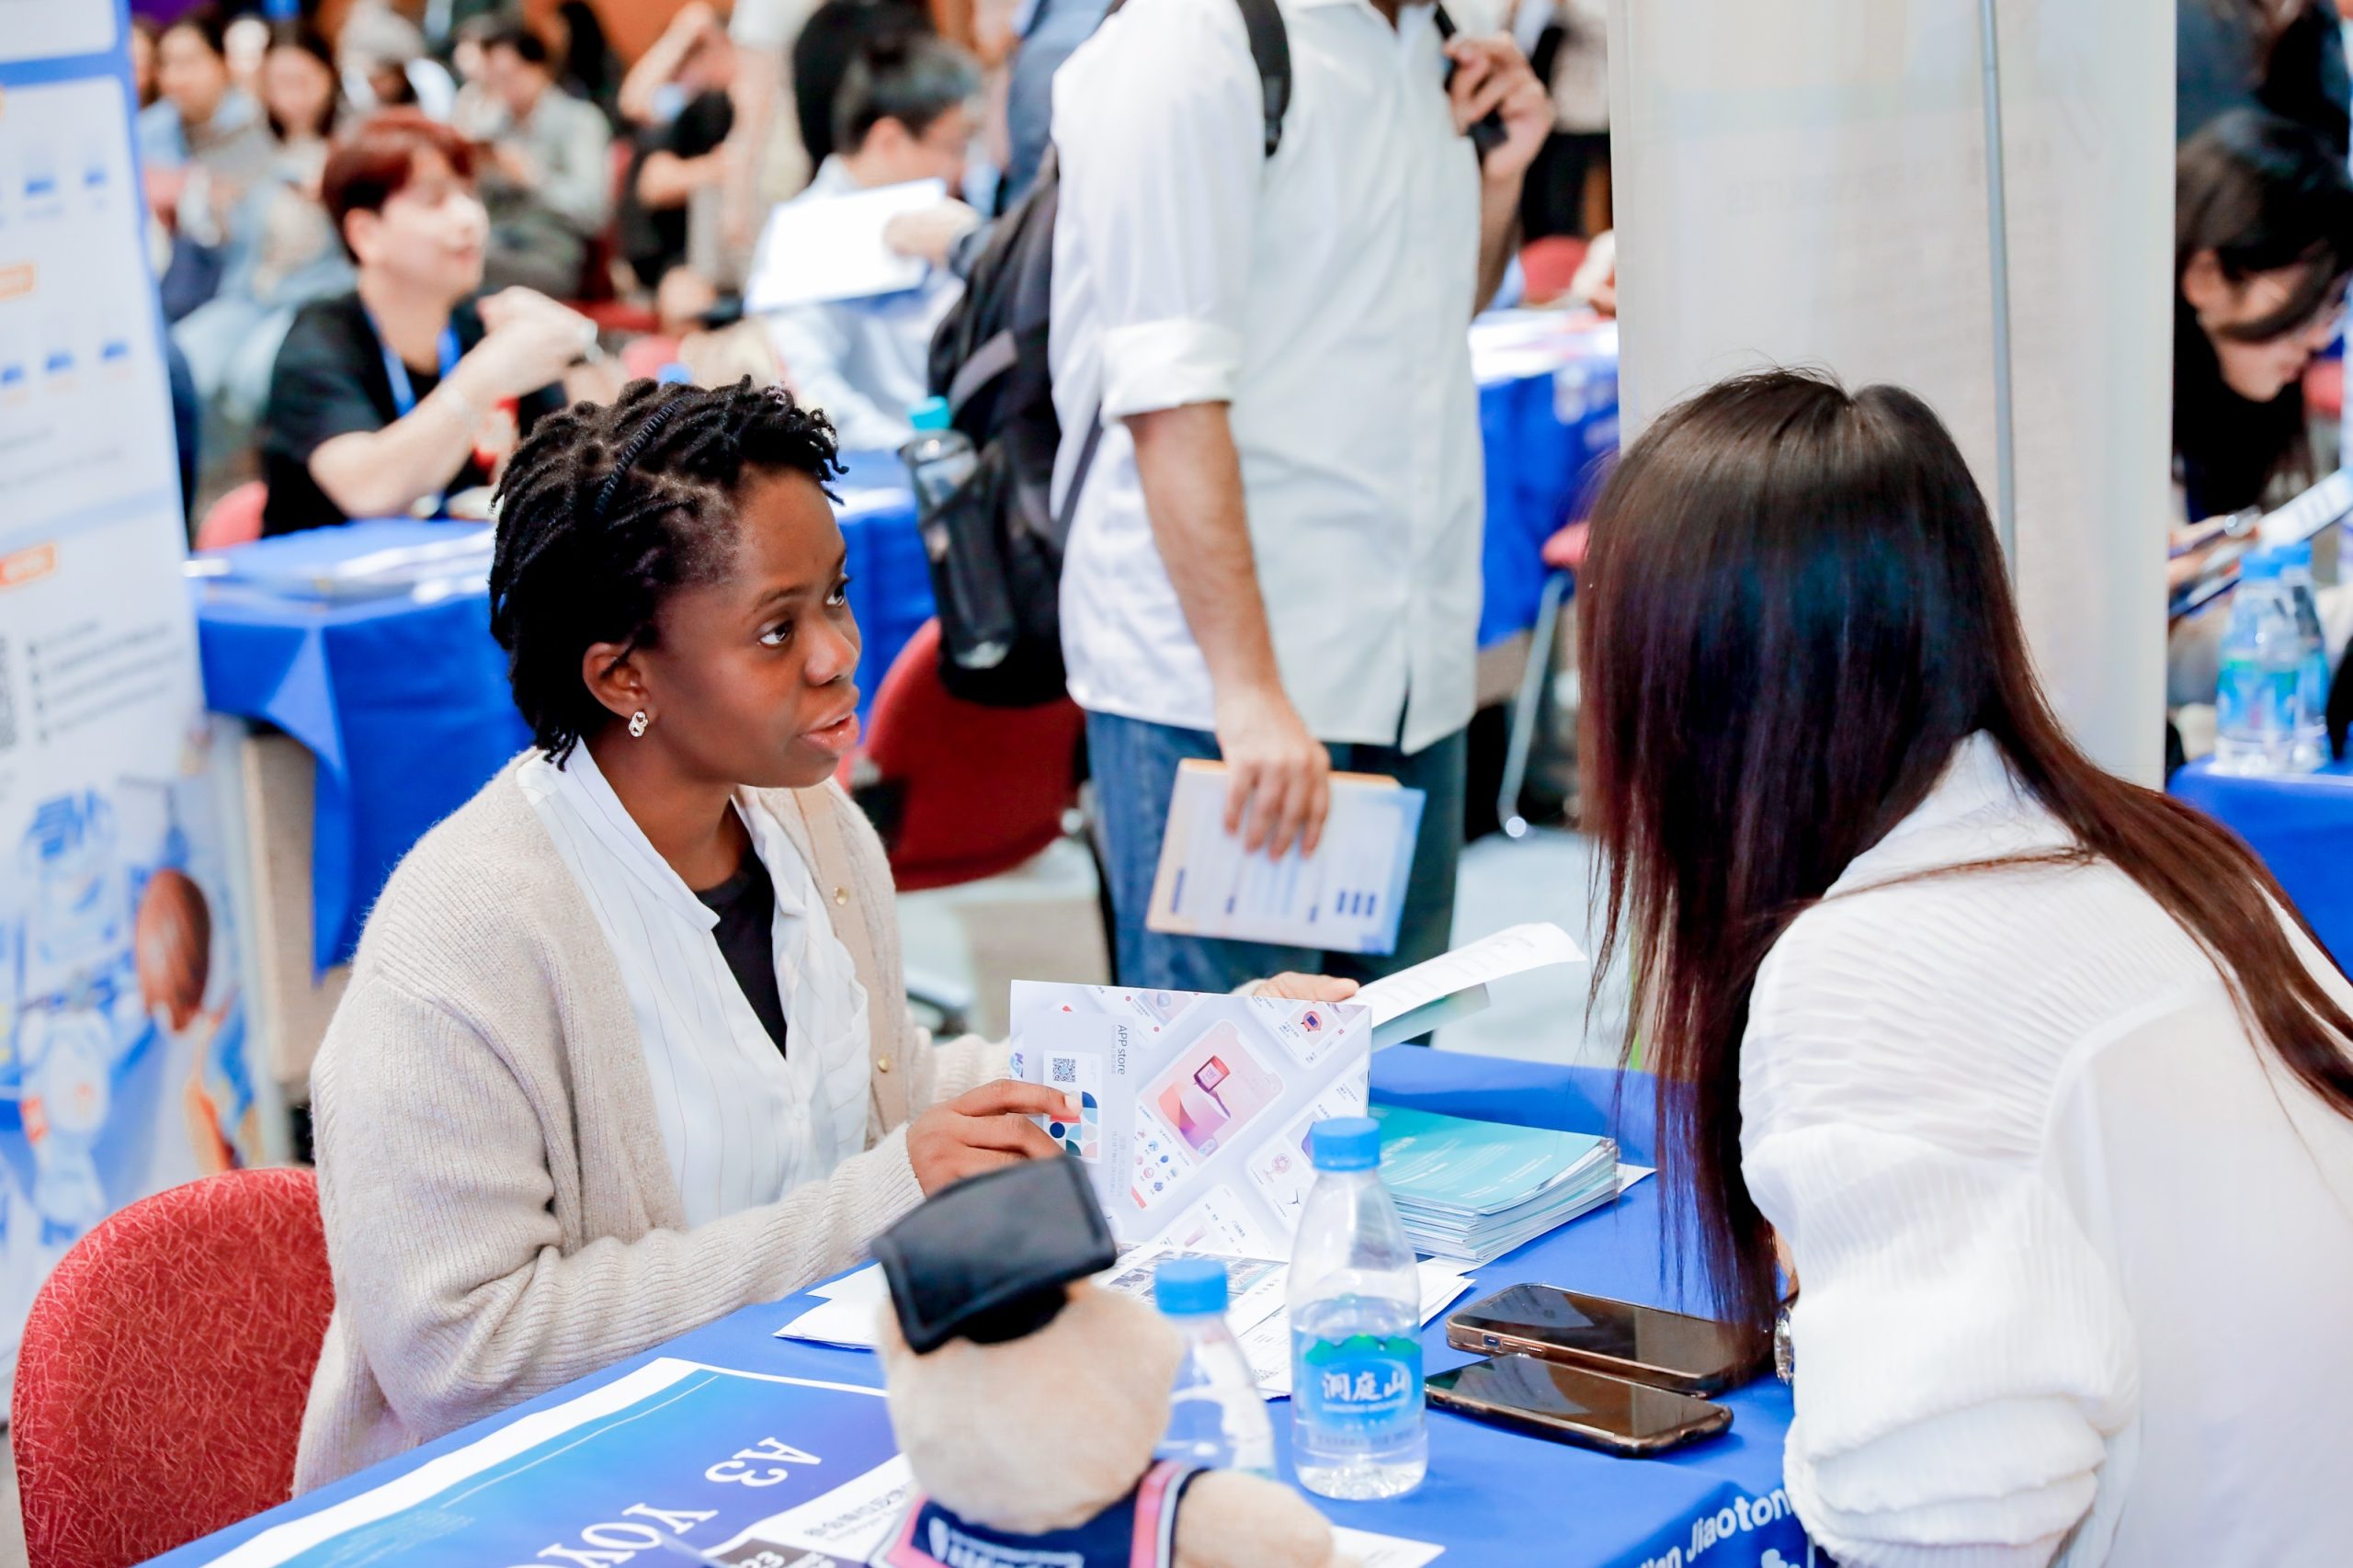 Job fair offers career opportunities to international students